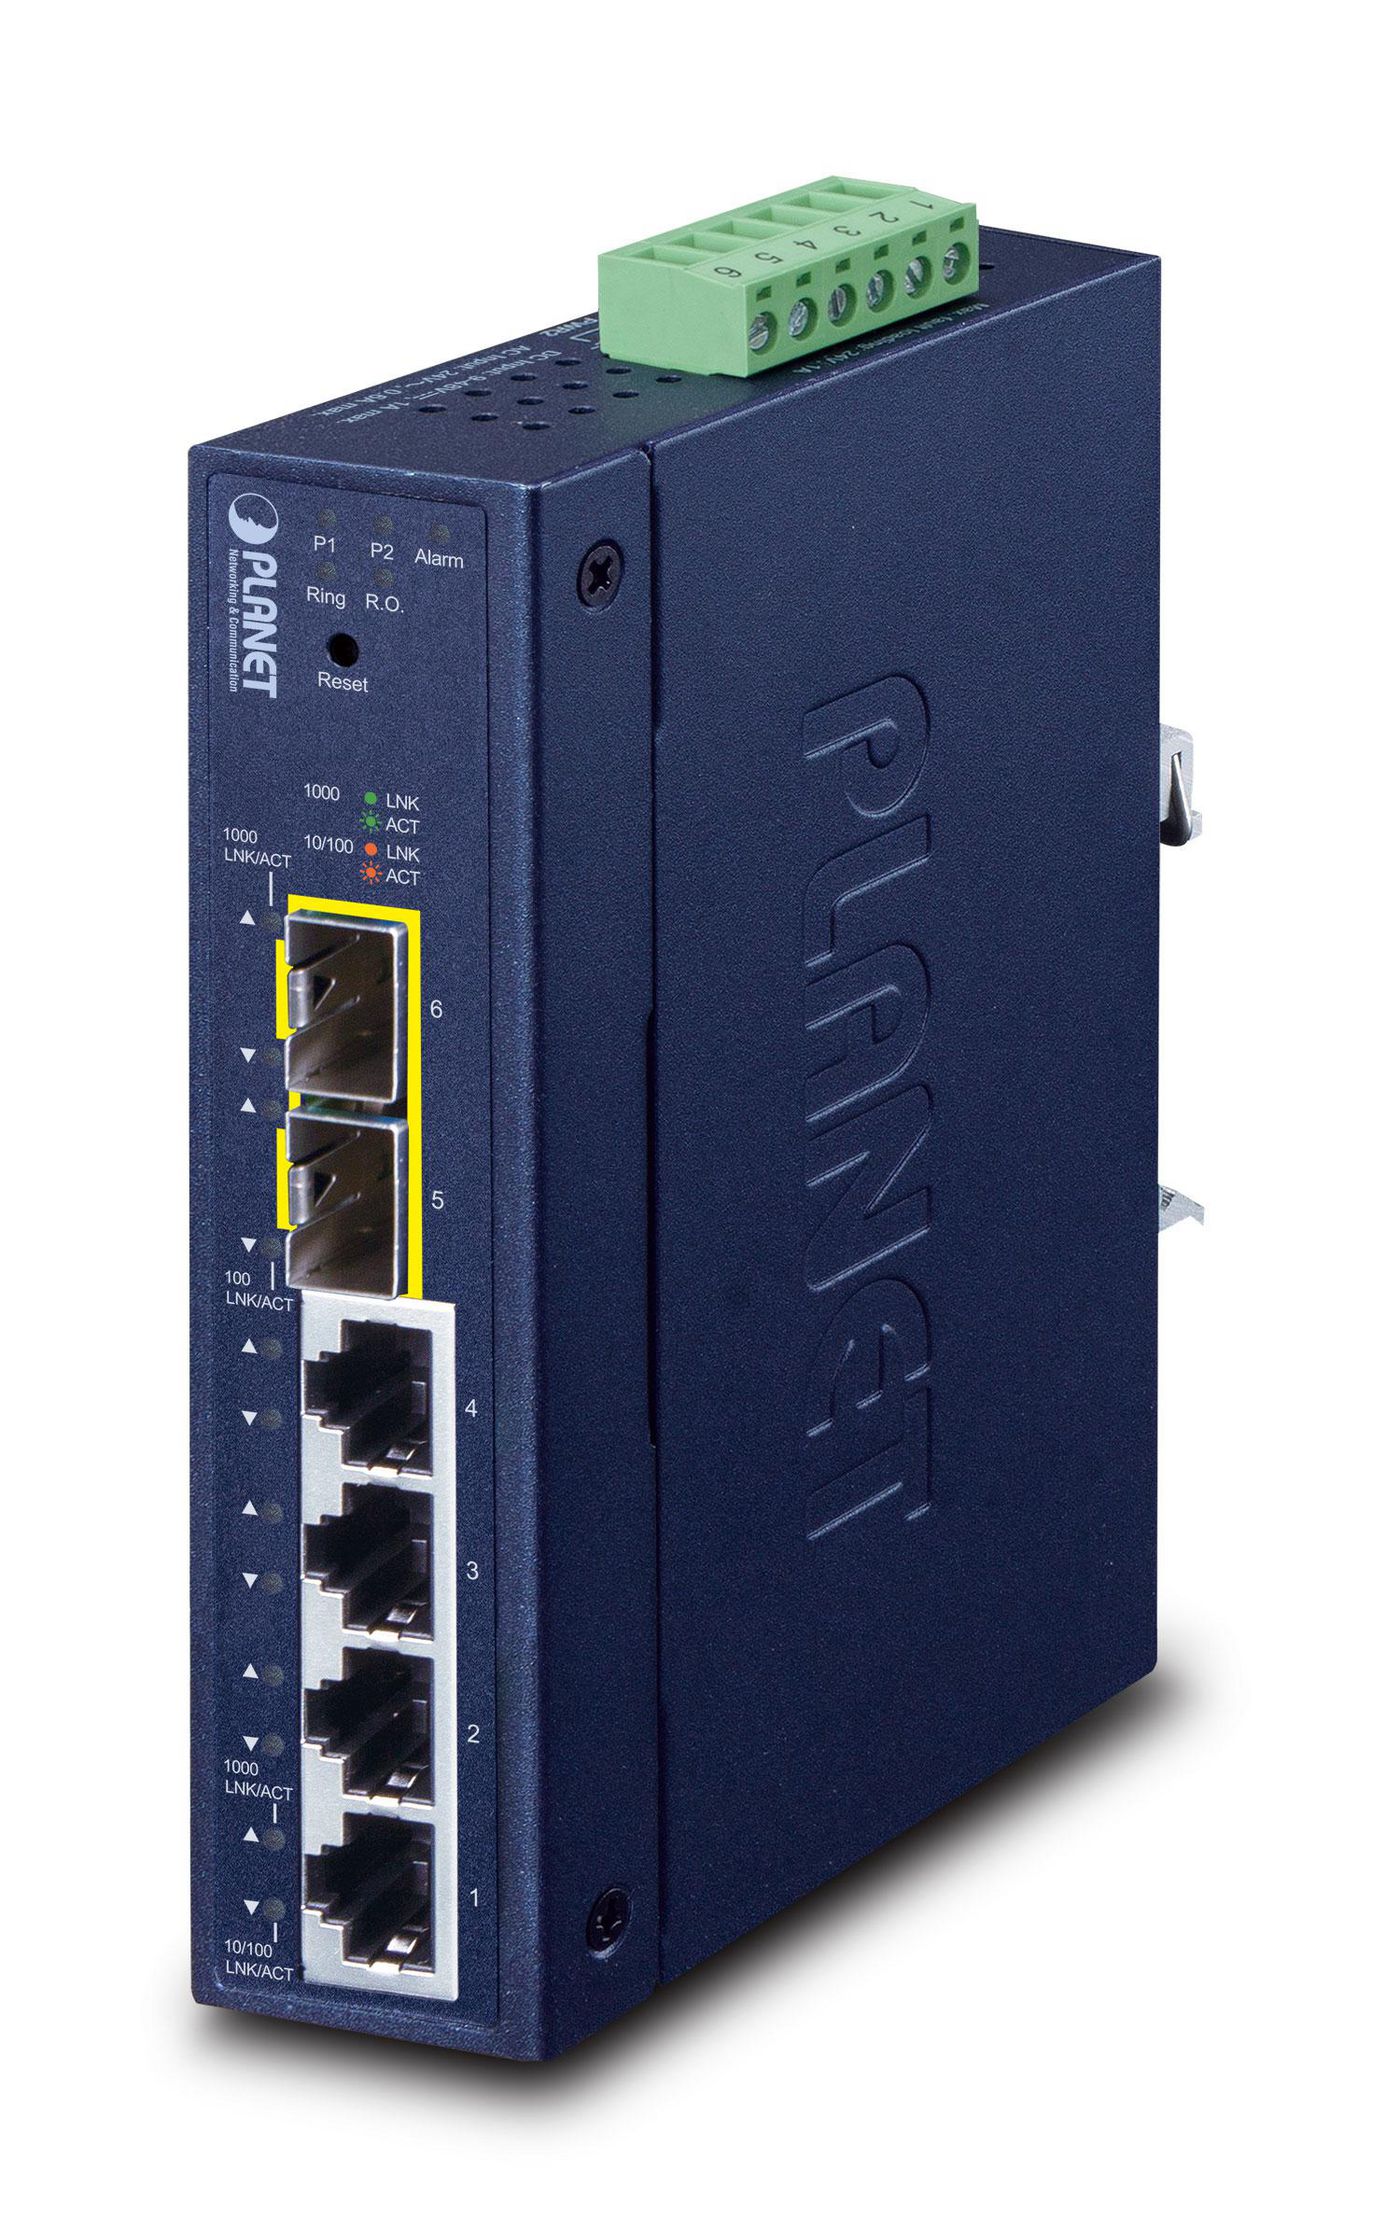 PLANET TECHNOLOGY Planet IGS-4215-4T2S Industrial L2/L4 4-Port 10/100/1000T SFP Managed Switch